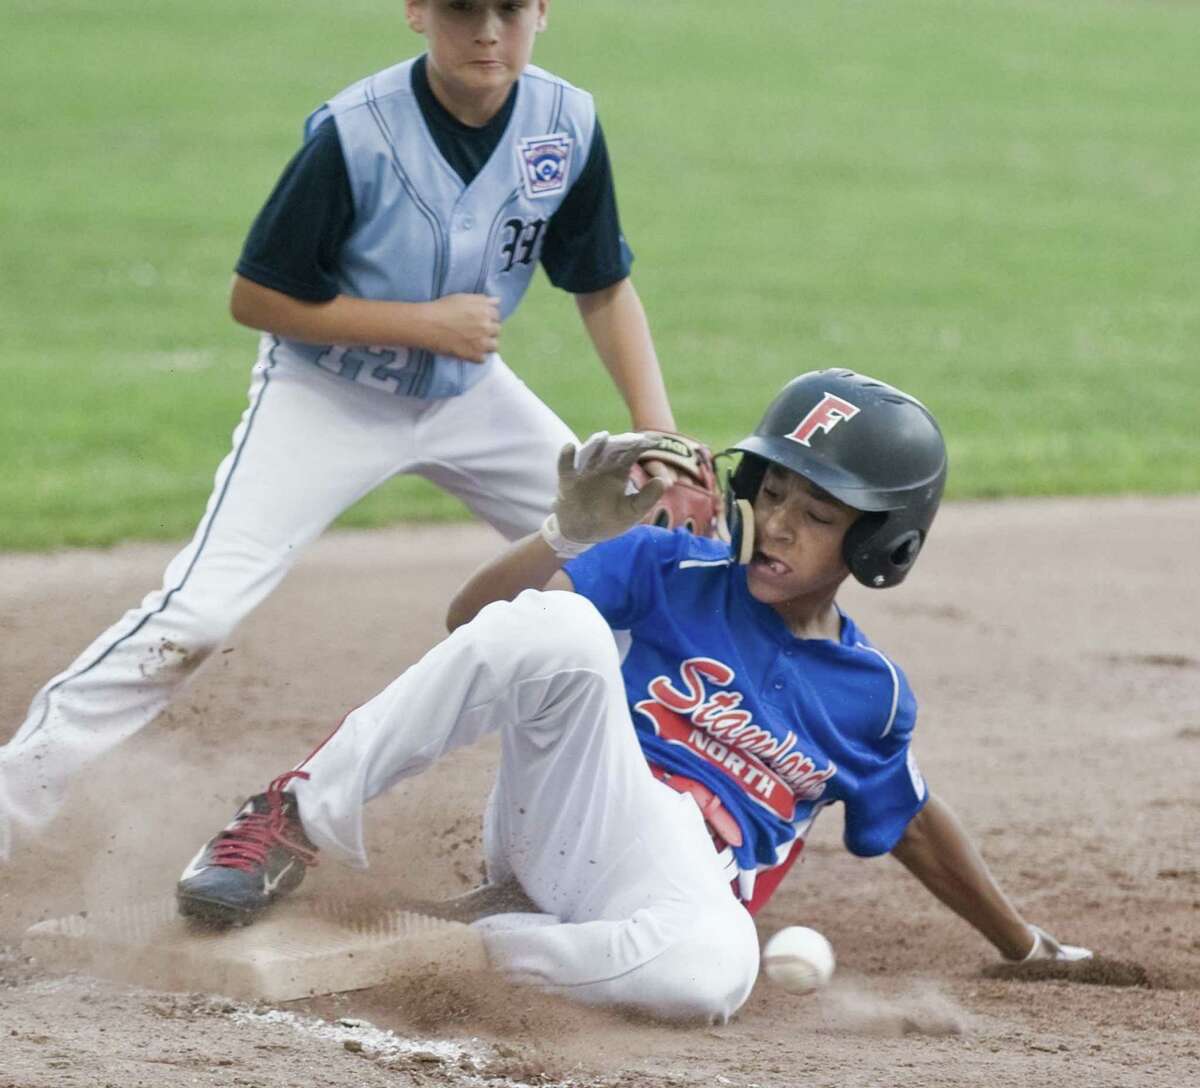 Stamford North's Antonio Belgrove slides into third during the Little League playoffs against Wilton, at Scalzi Park in Stamford. Wednesday, July 12, 2017